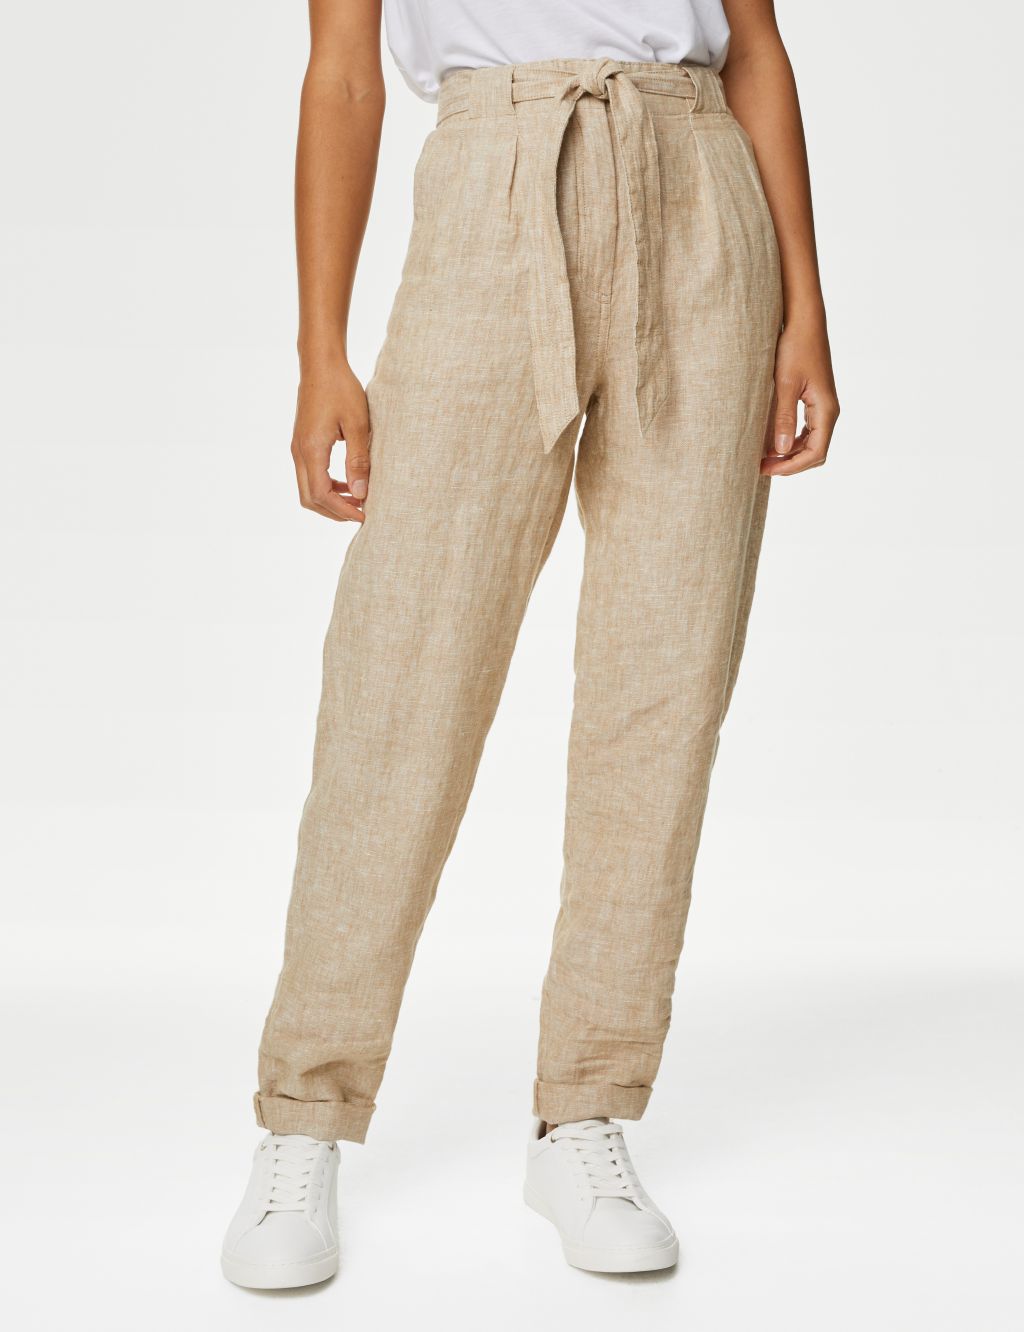 Pure Linen Belted Tapered Trousers image 3